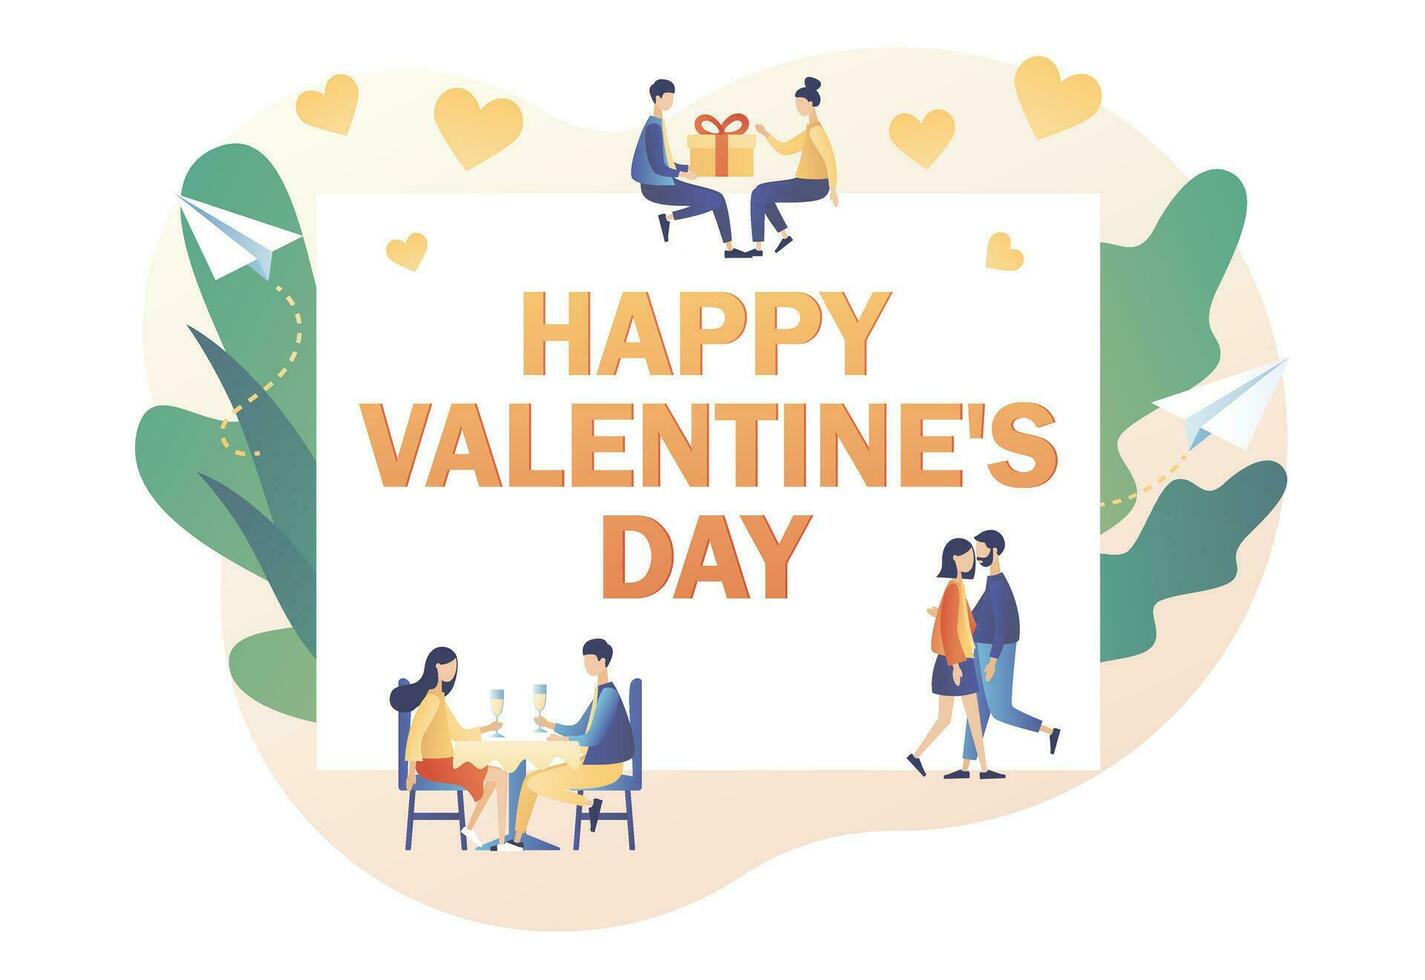 Happy Valentines day - text on greeting card. Romantic relations and date. Tiny people in love greet each other. Modern flat cartoon style. Vector illustration on white background